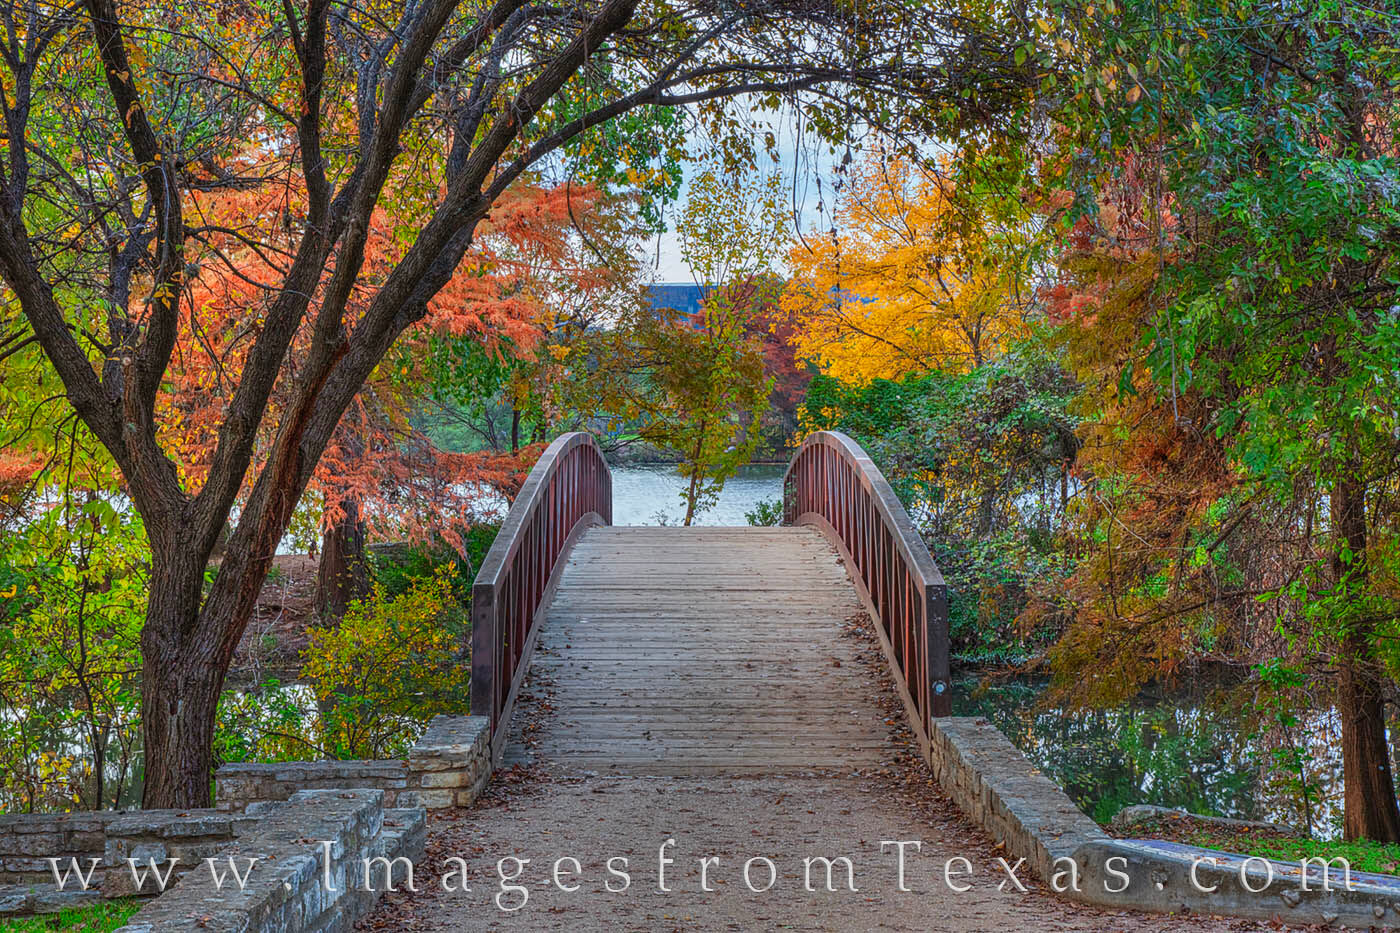 I came across this small footbridge several years ago. Since that chance discovery, I had been wanting to photograph this intimate...